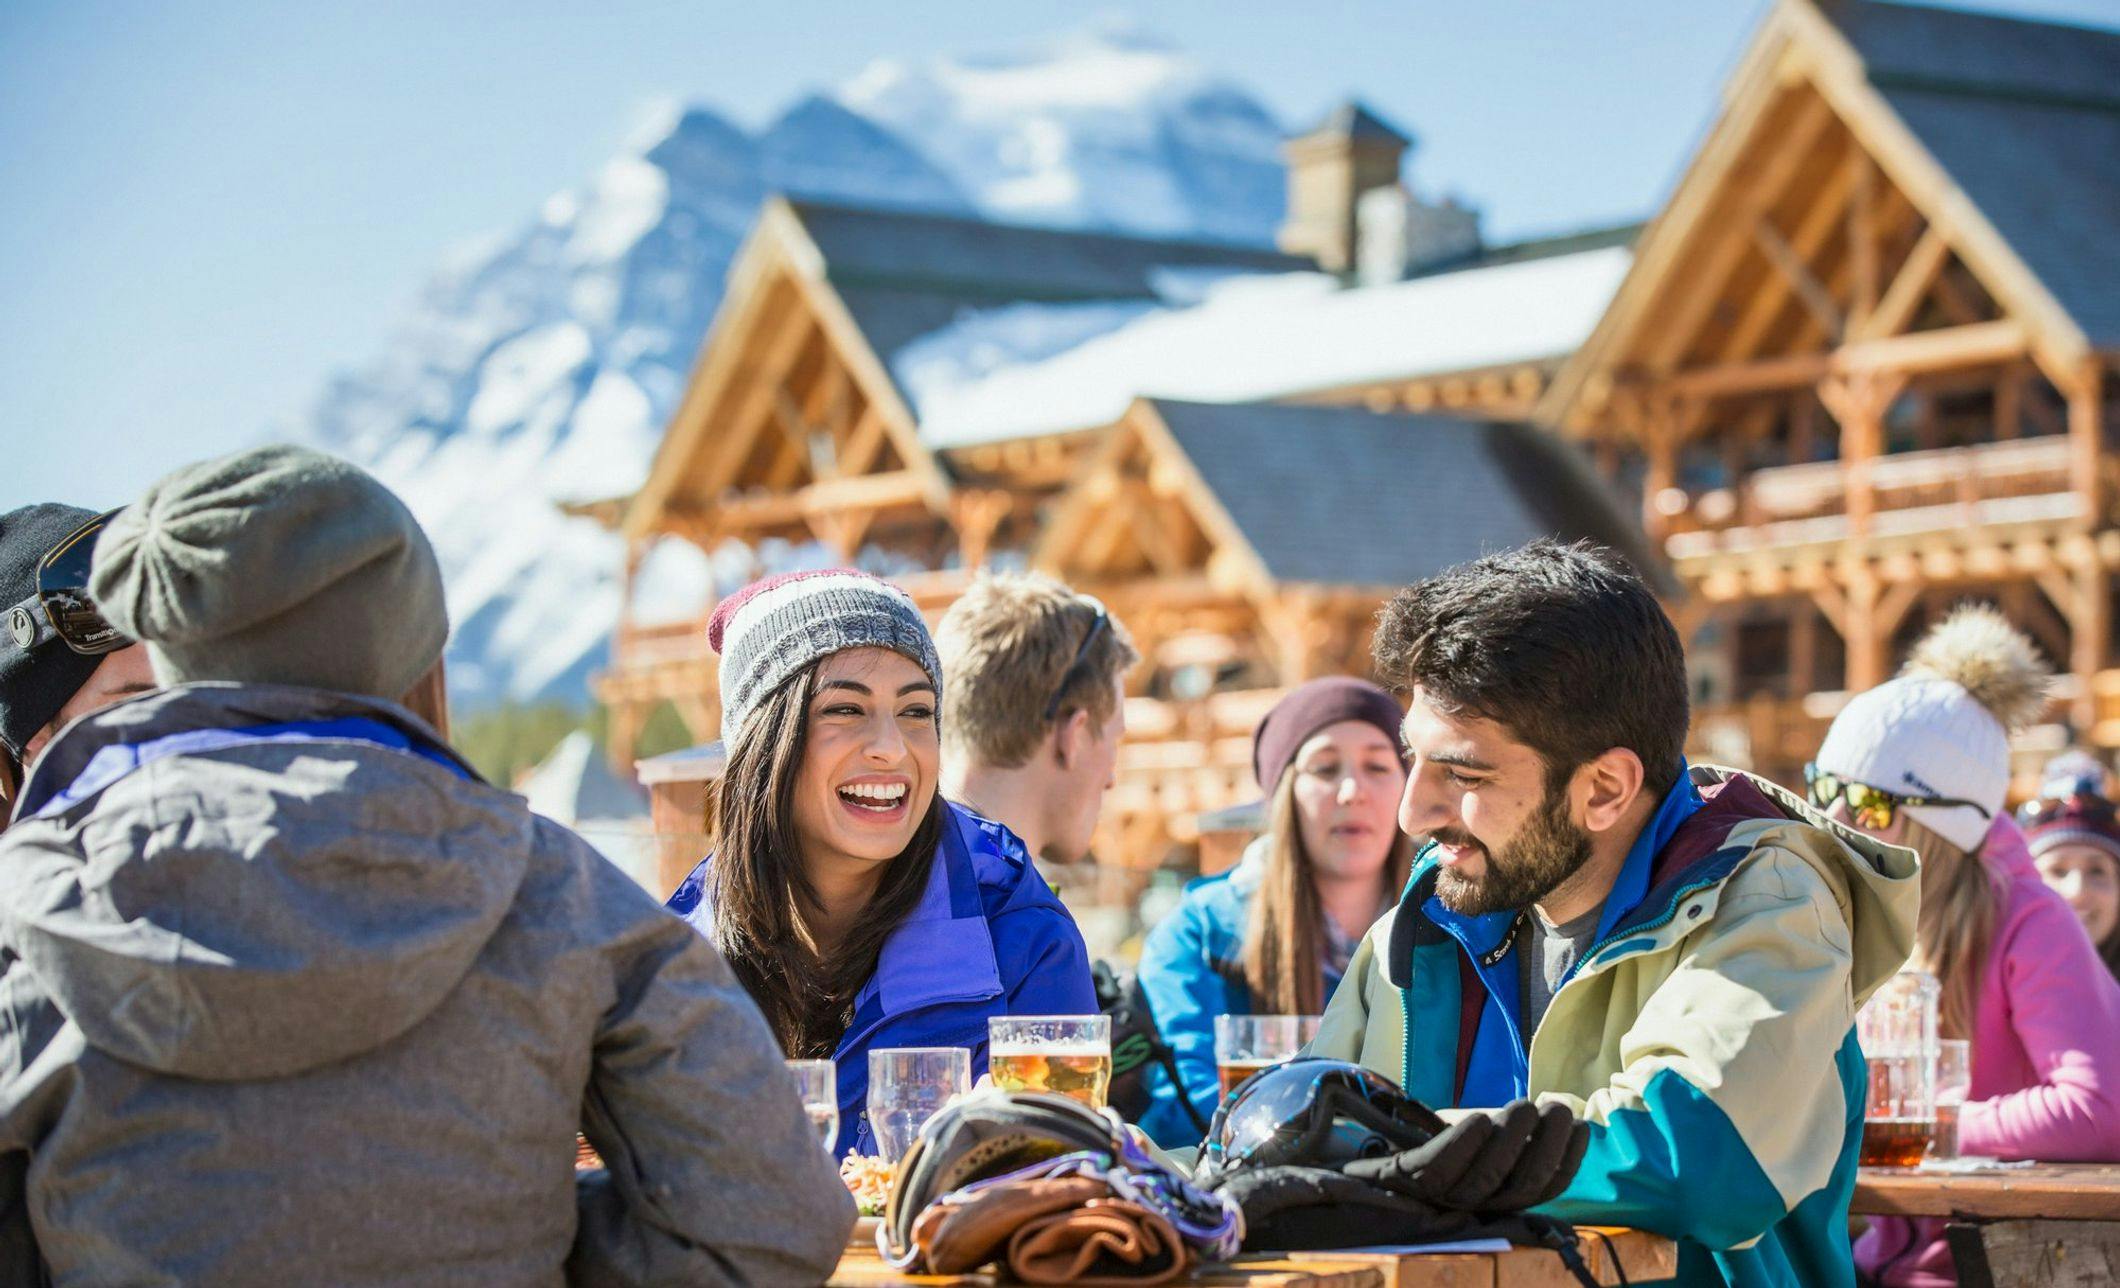 A group of friends enjoy a meal and drinks at an outdoor table at a ski resort. You can see the ski chalet and mountains in the background